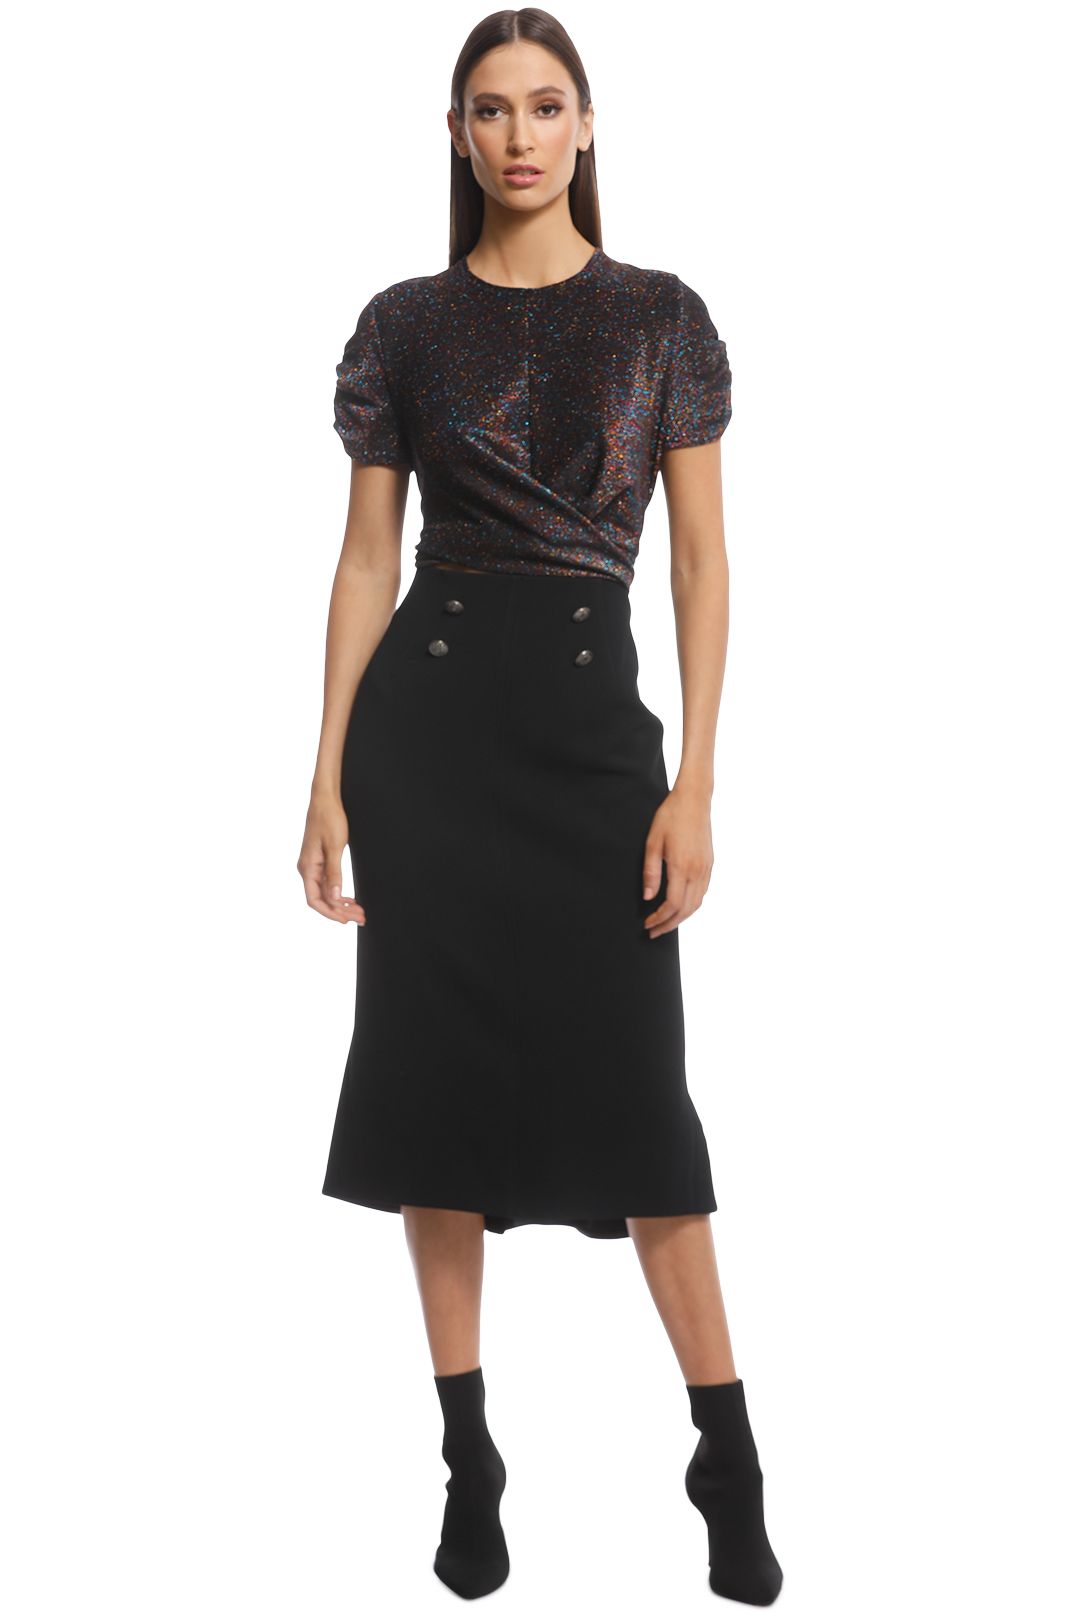 Ginger and Smart - Suffuse Skirt - Black - Front